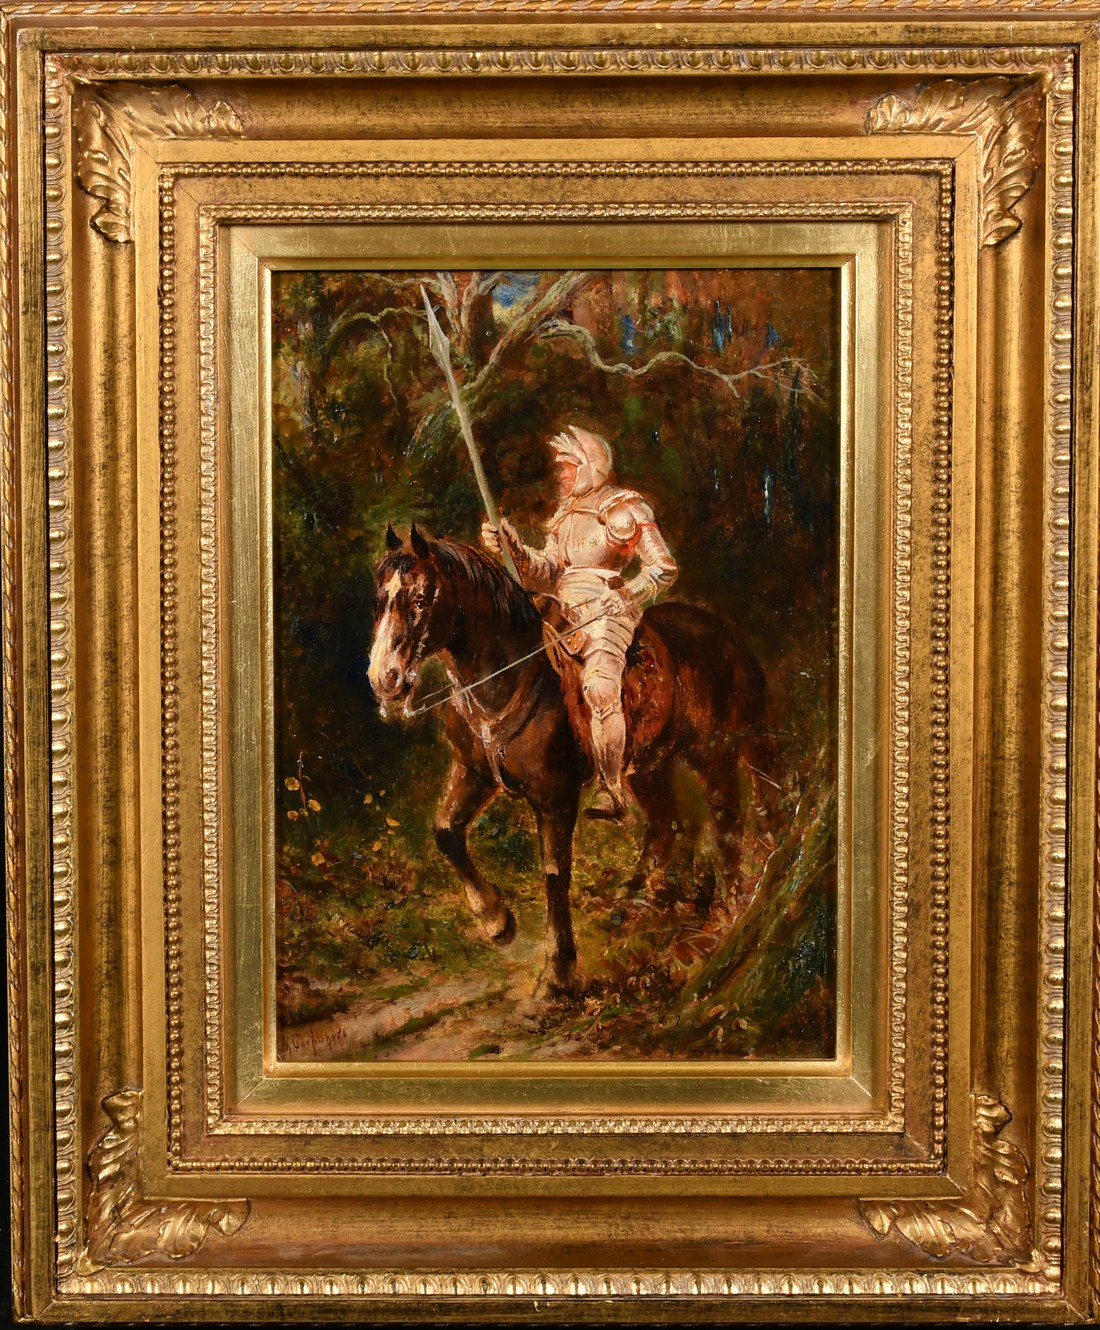 Late 19th Century Continental School, A Knight in armour on his horse, oil on board, indistinctly - Image 2 of 4